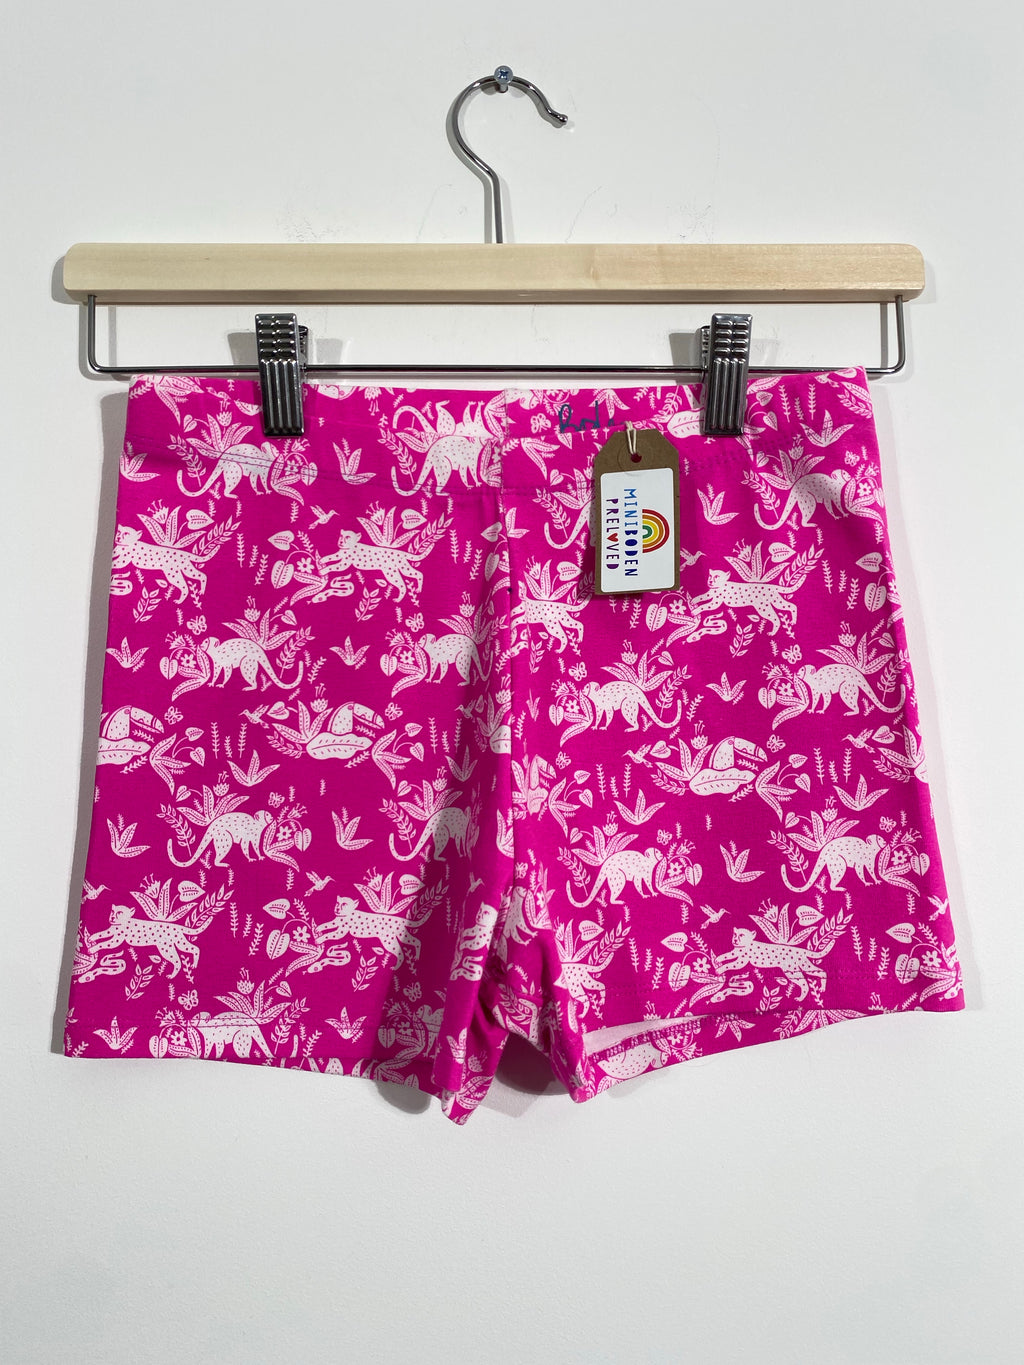 NEW Neon Pink Lemur Patterned Cycle Shorts (11-12 Years)